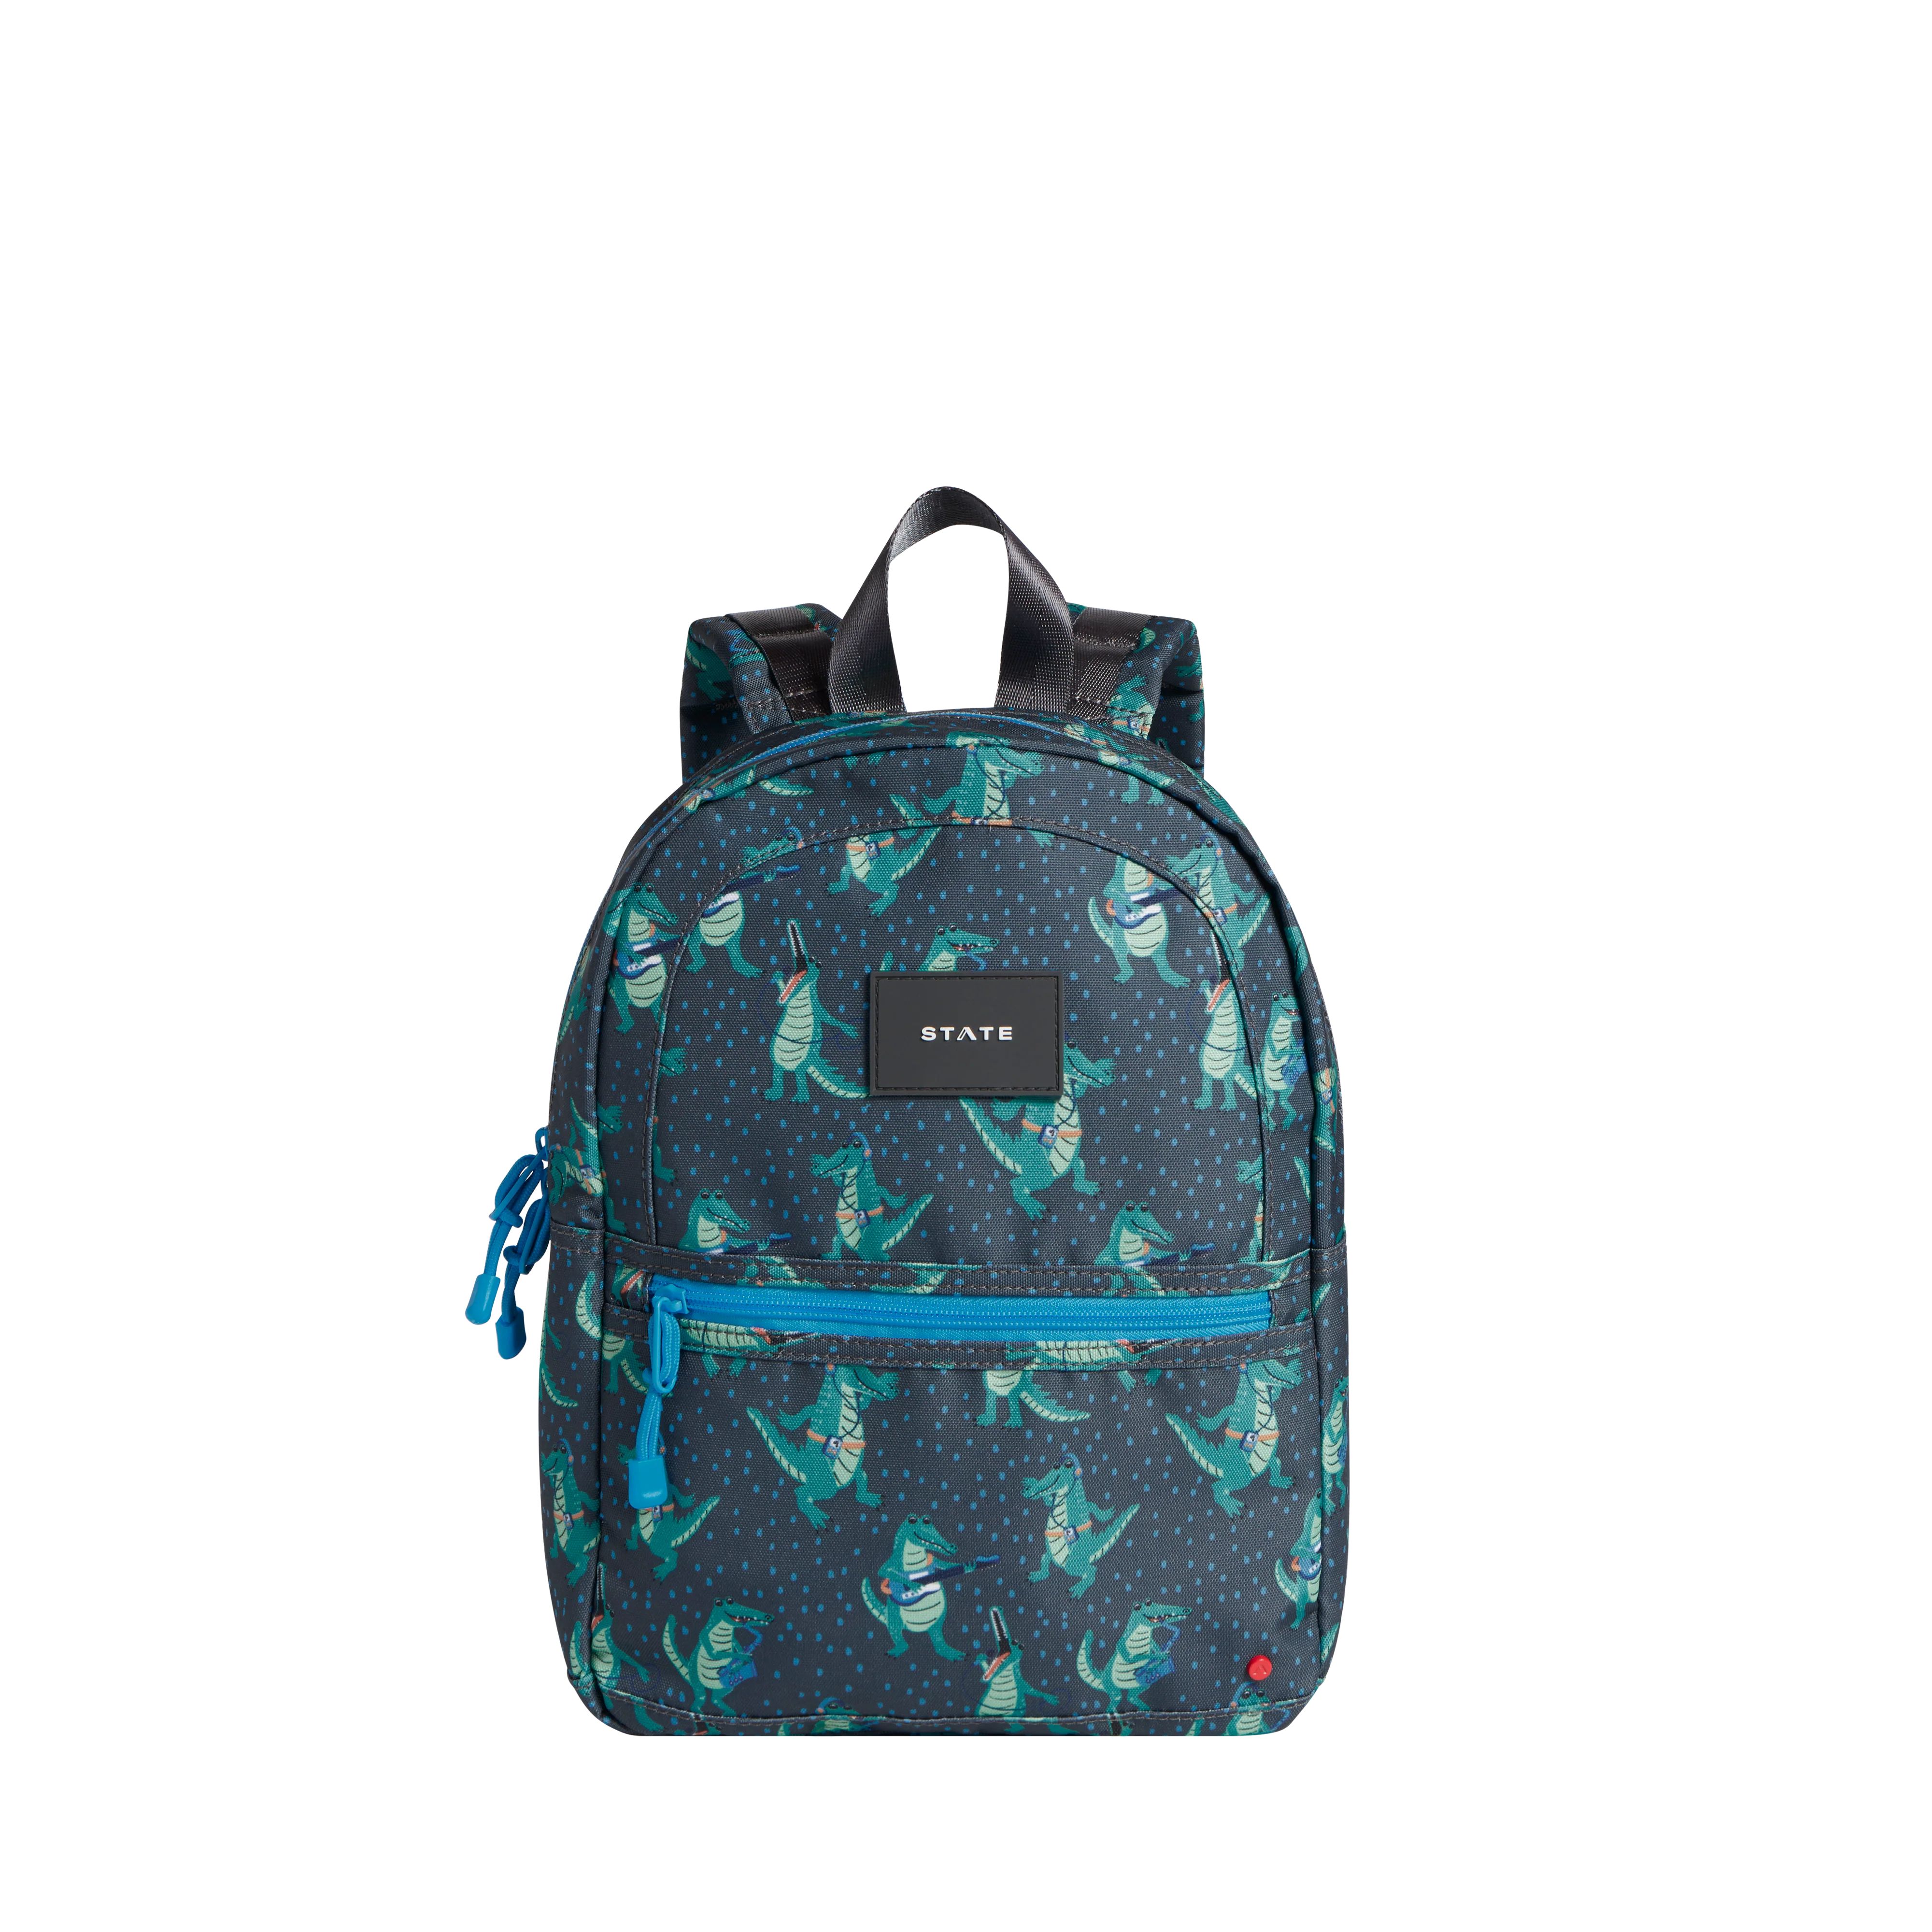 STATE Bags | Kane Kids Mini Backpack Recycled Poly Canvas Alligators | STATE Bags